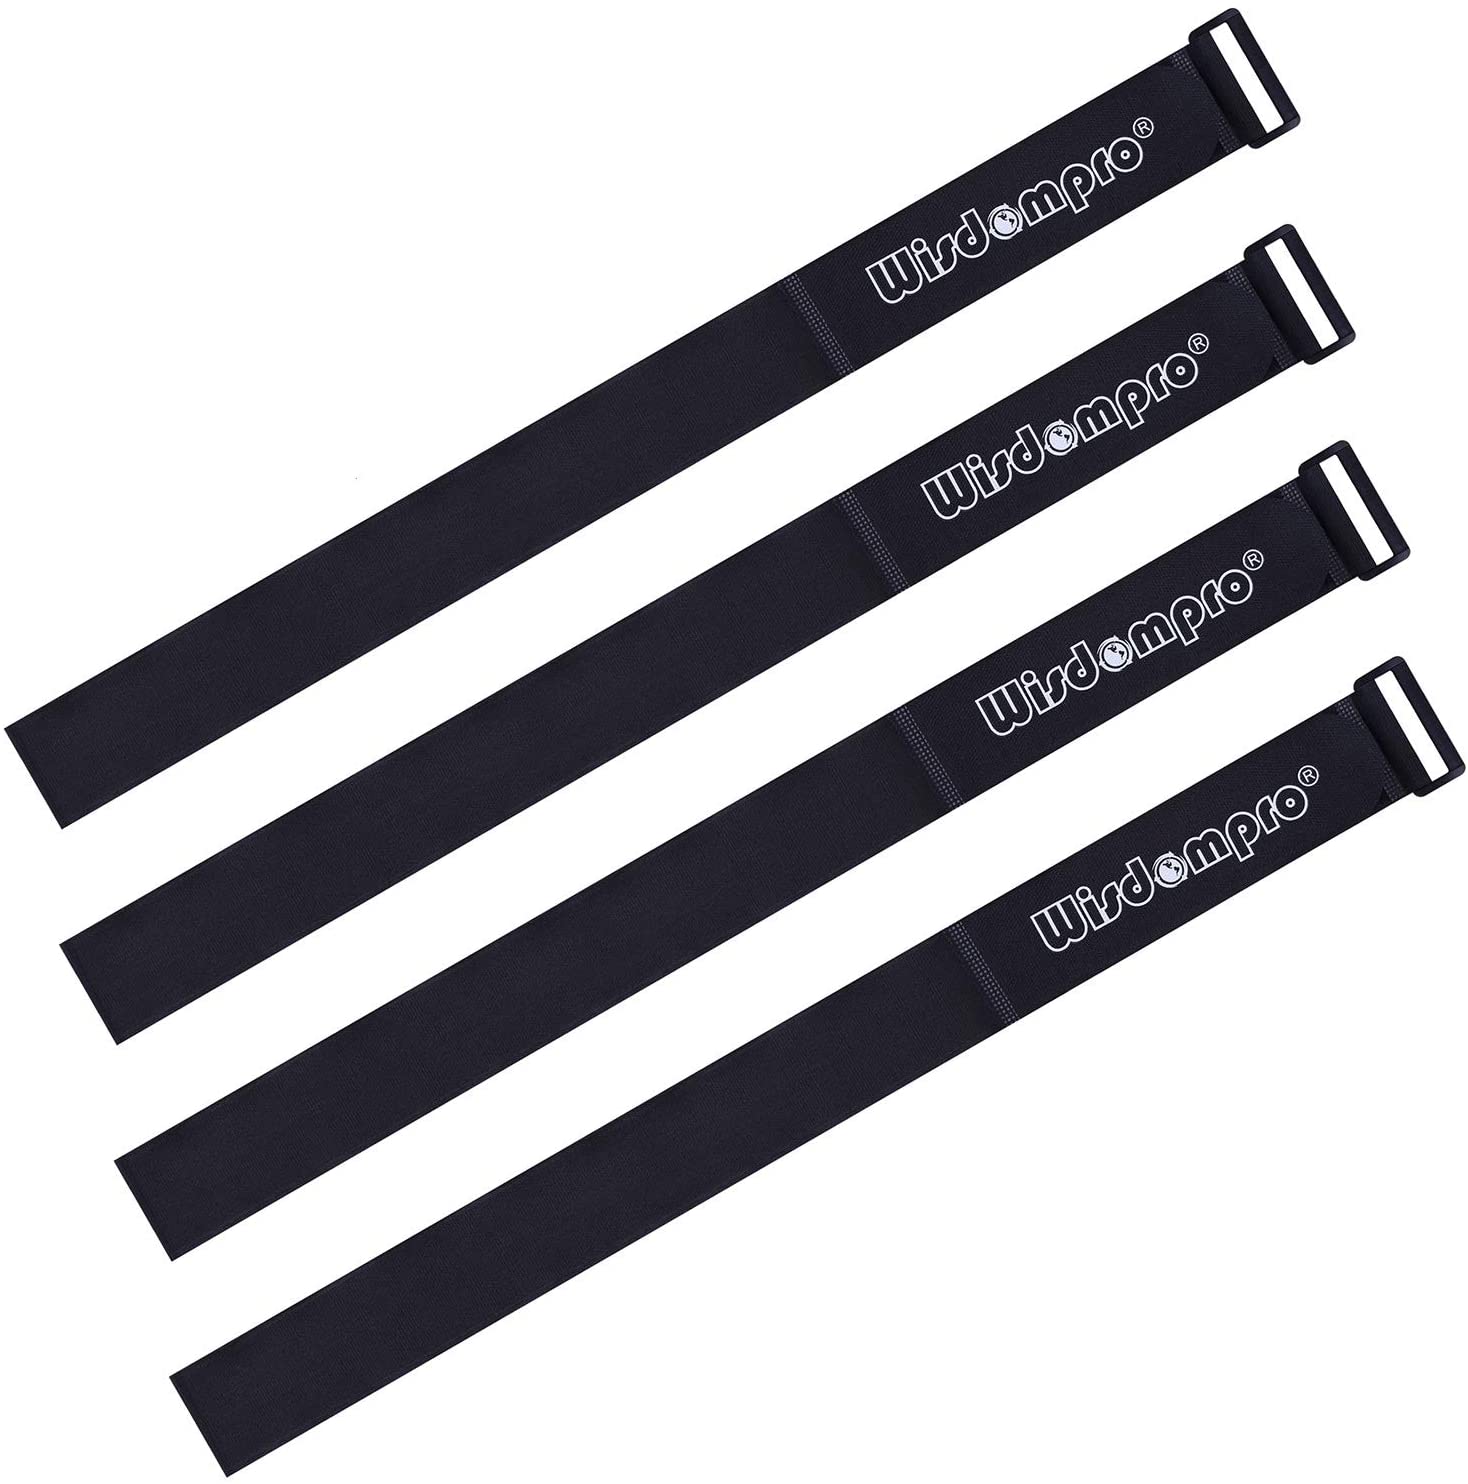 Extra Large 4 Pack 2 x 48 Inches Hook and Loop Strap, Reusable Fastening Cable Tie Down Straps by Wisdompro - Reusable, Durable Functional Cinch Cable Straps for Your Home, Office, Workspace 